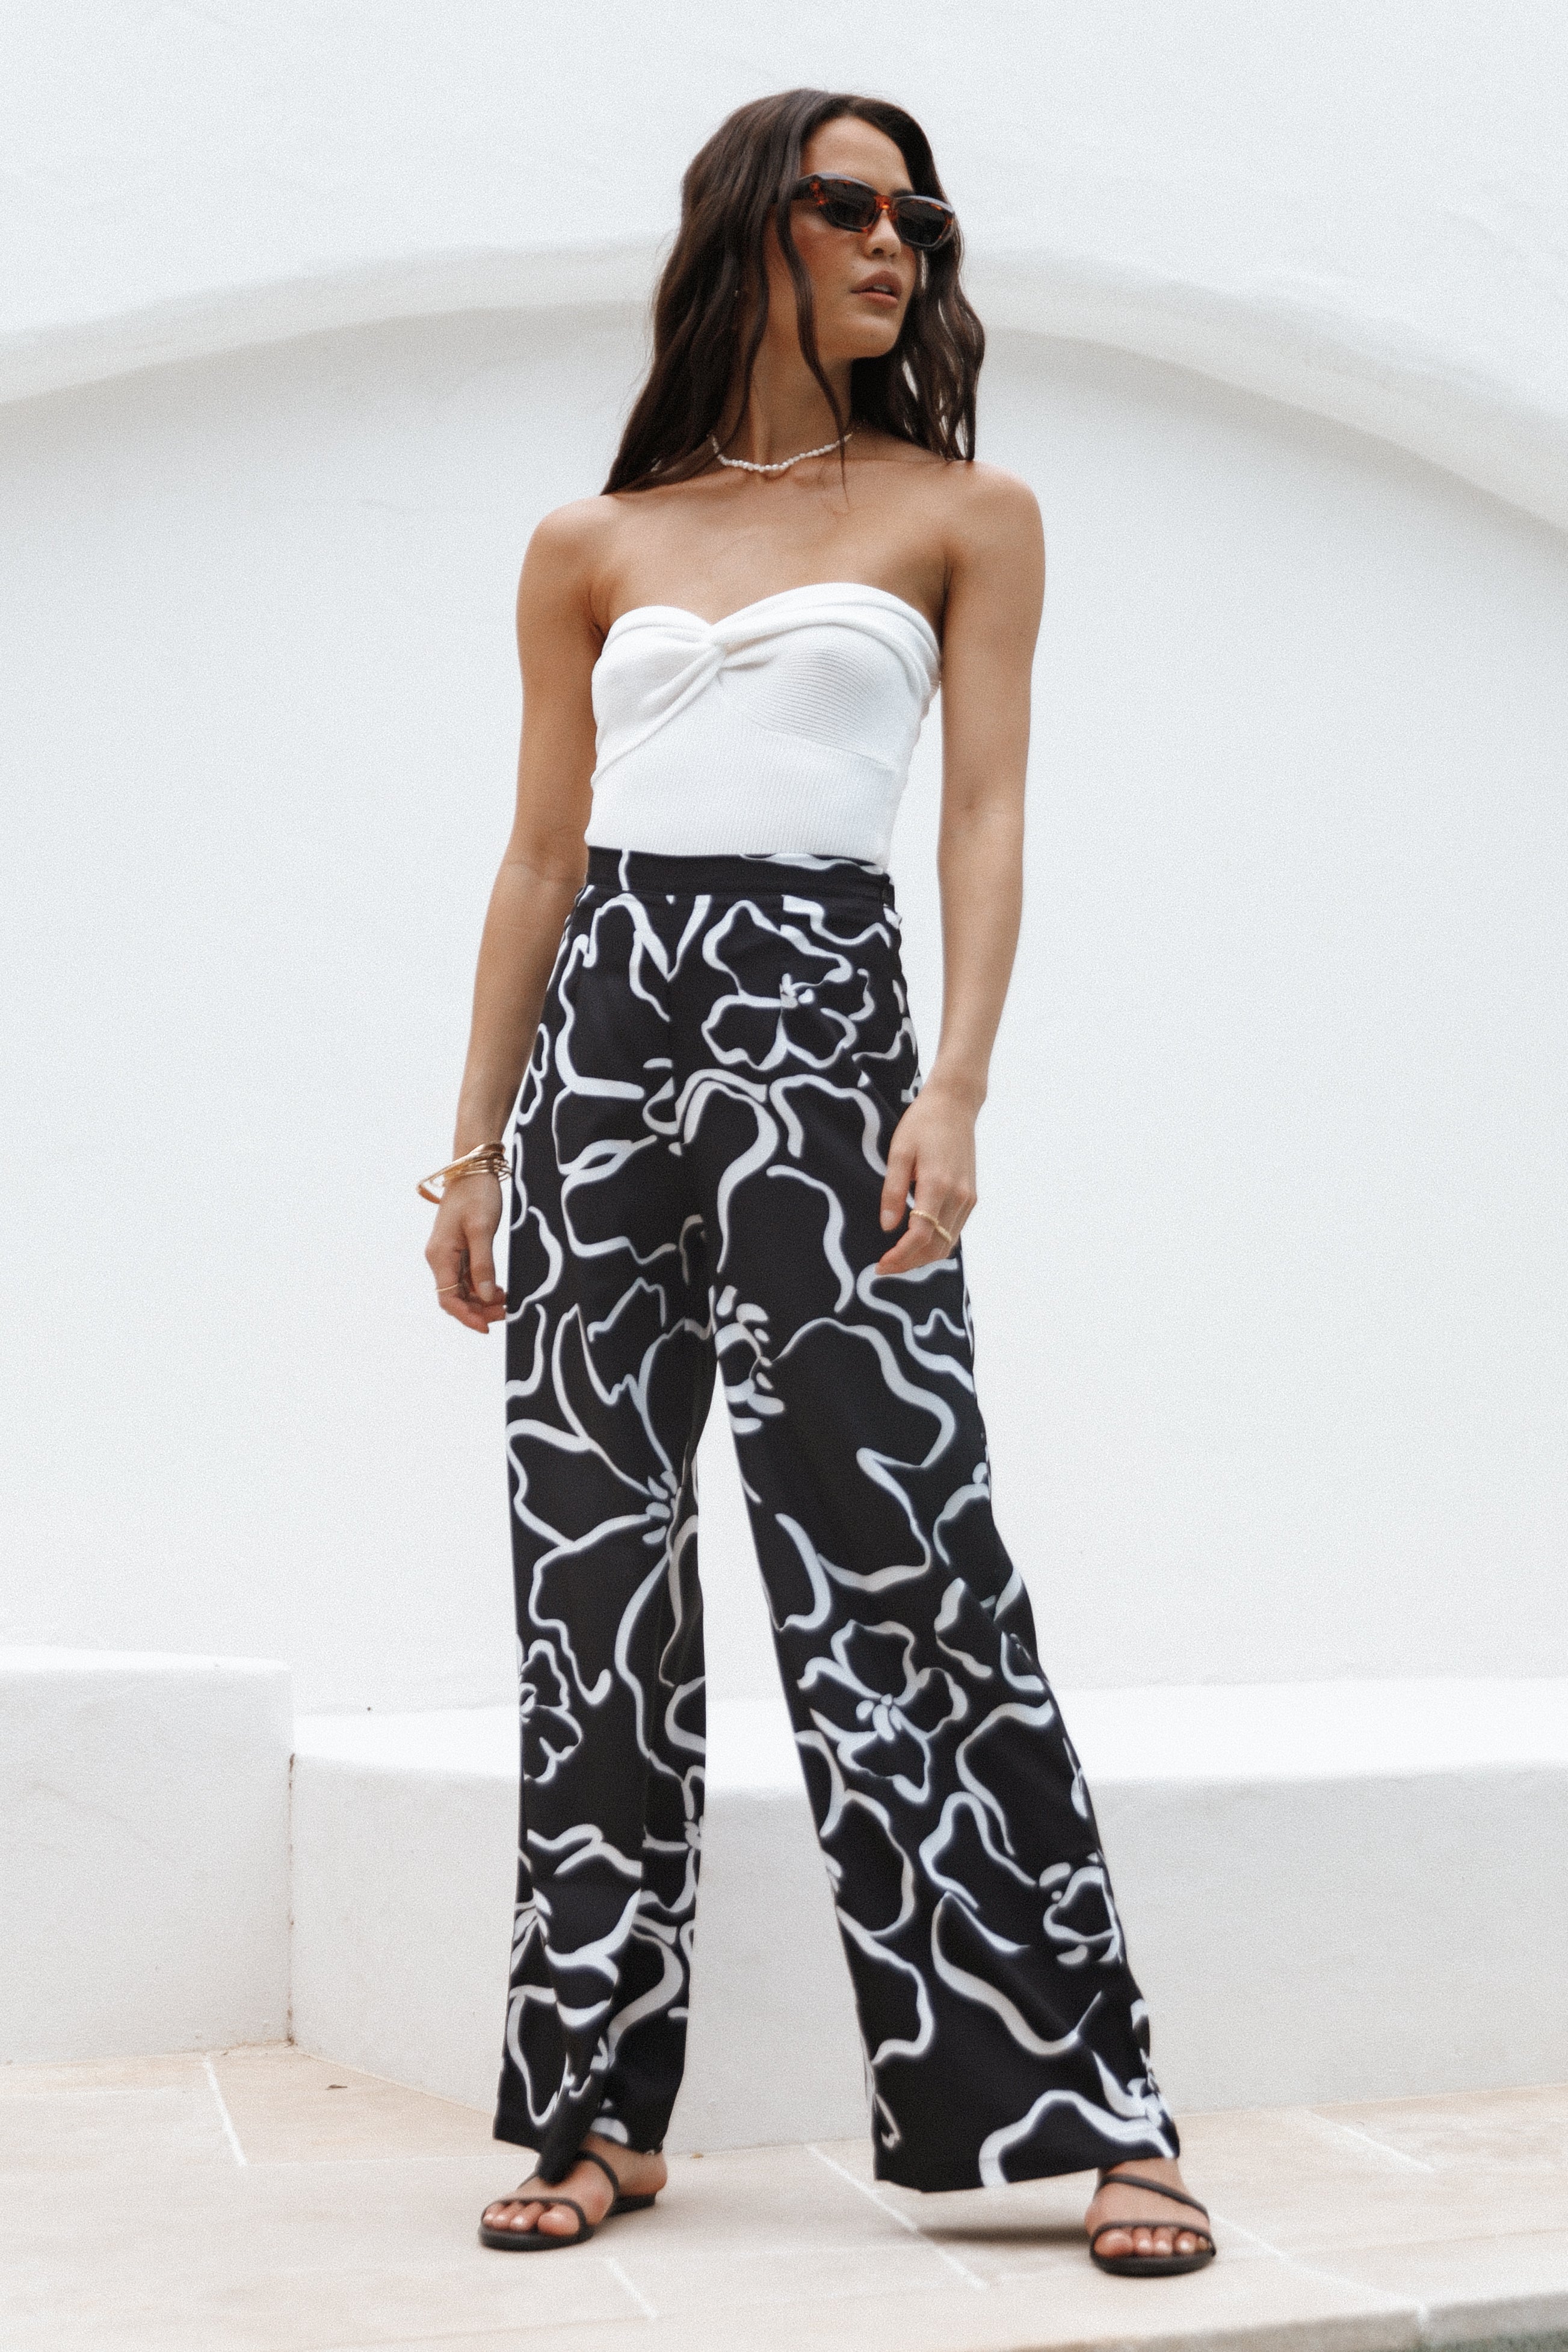 Black and White Floral Pants Outfits For Women (34 ideas & outfits)